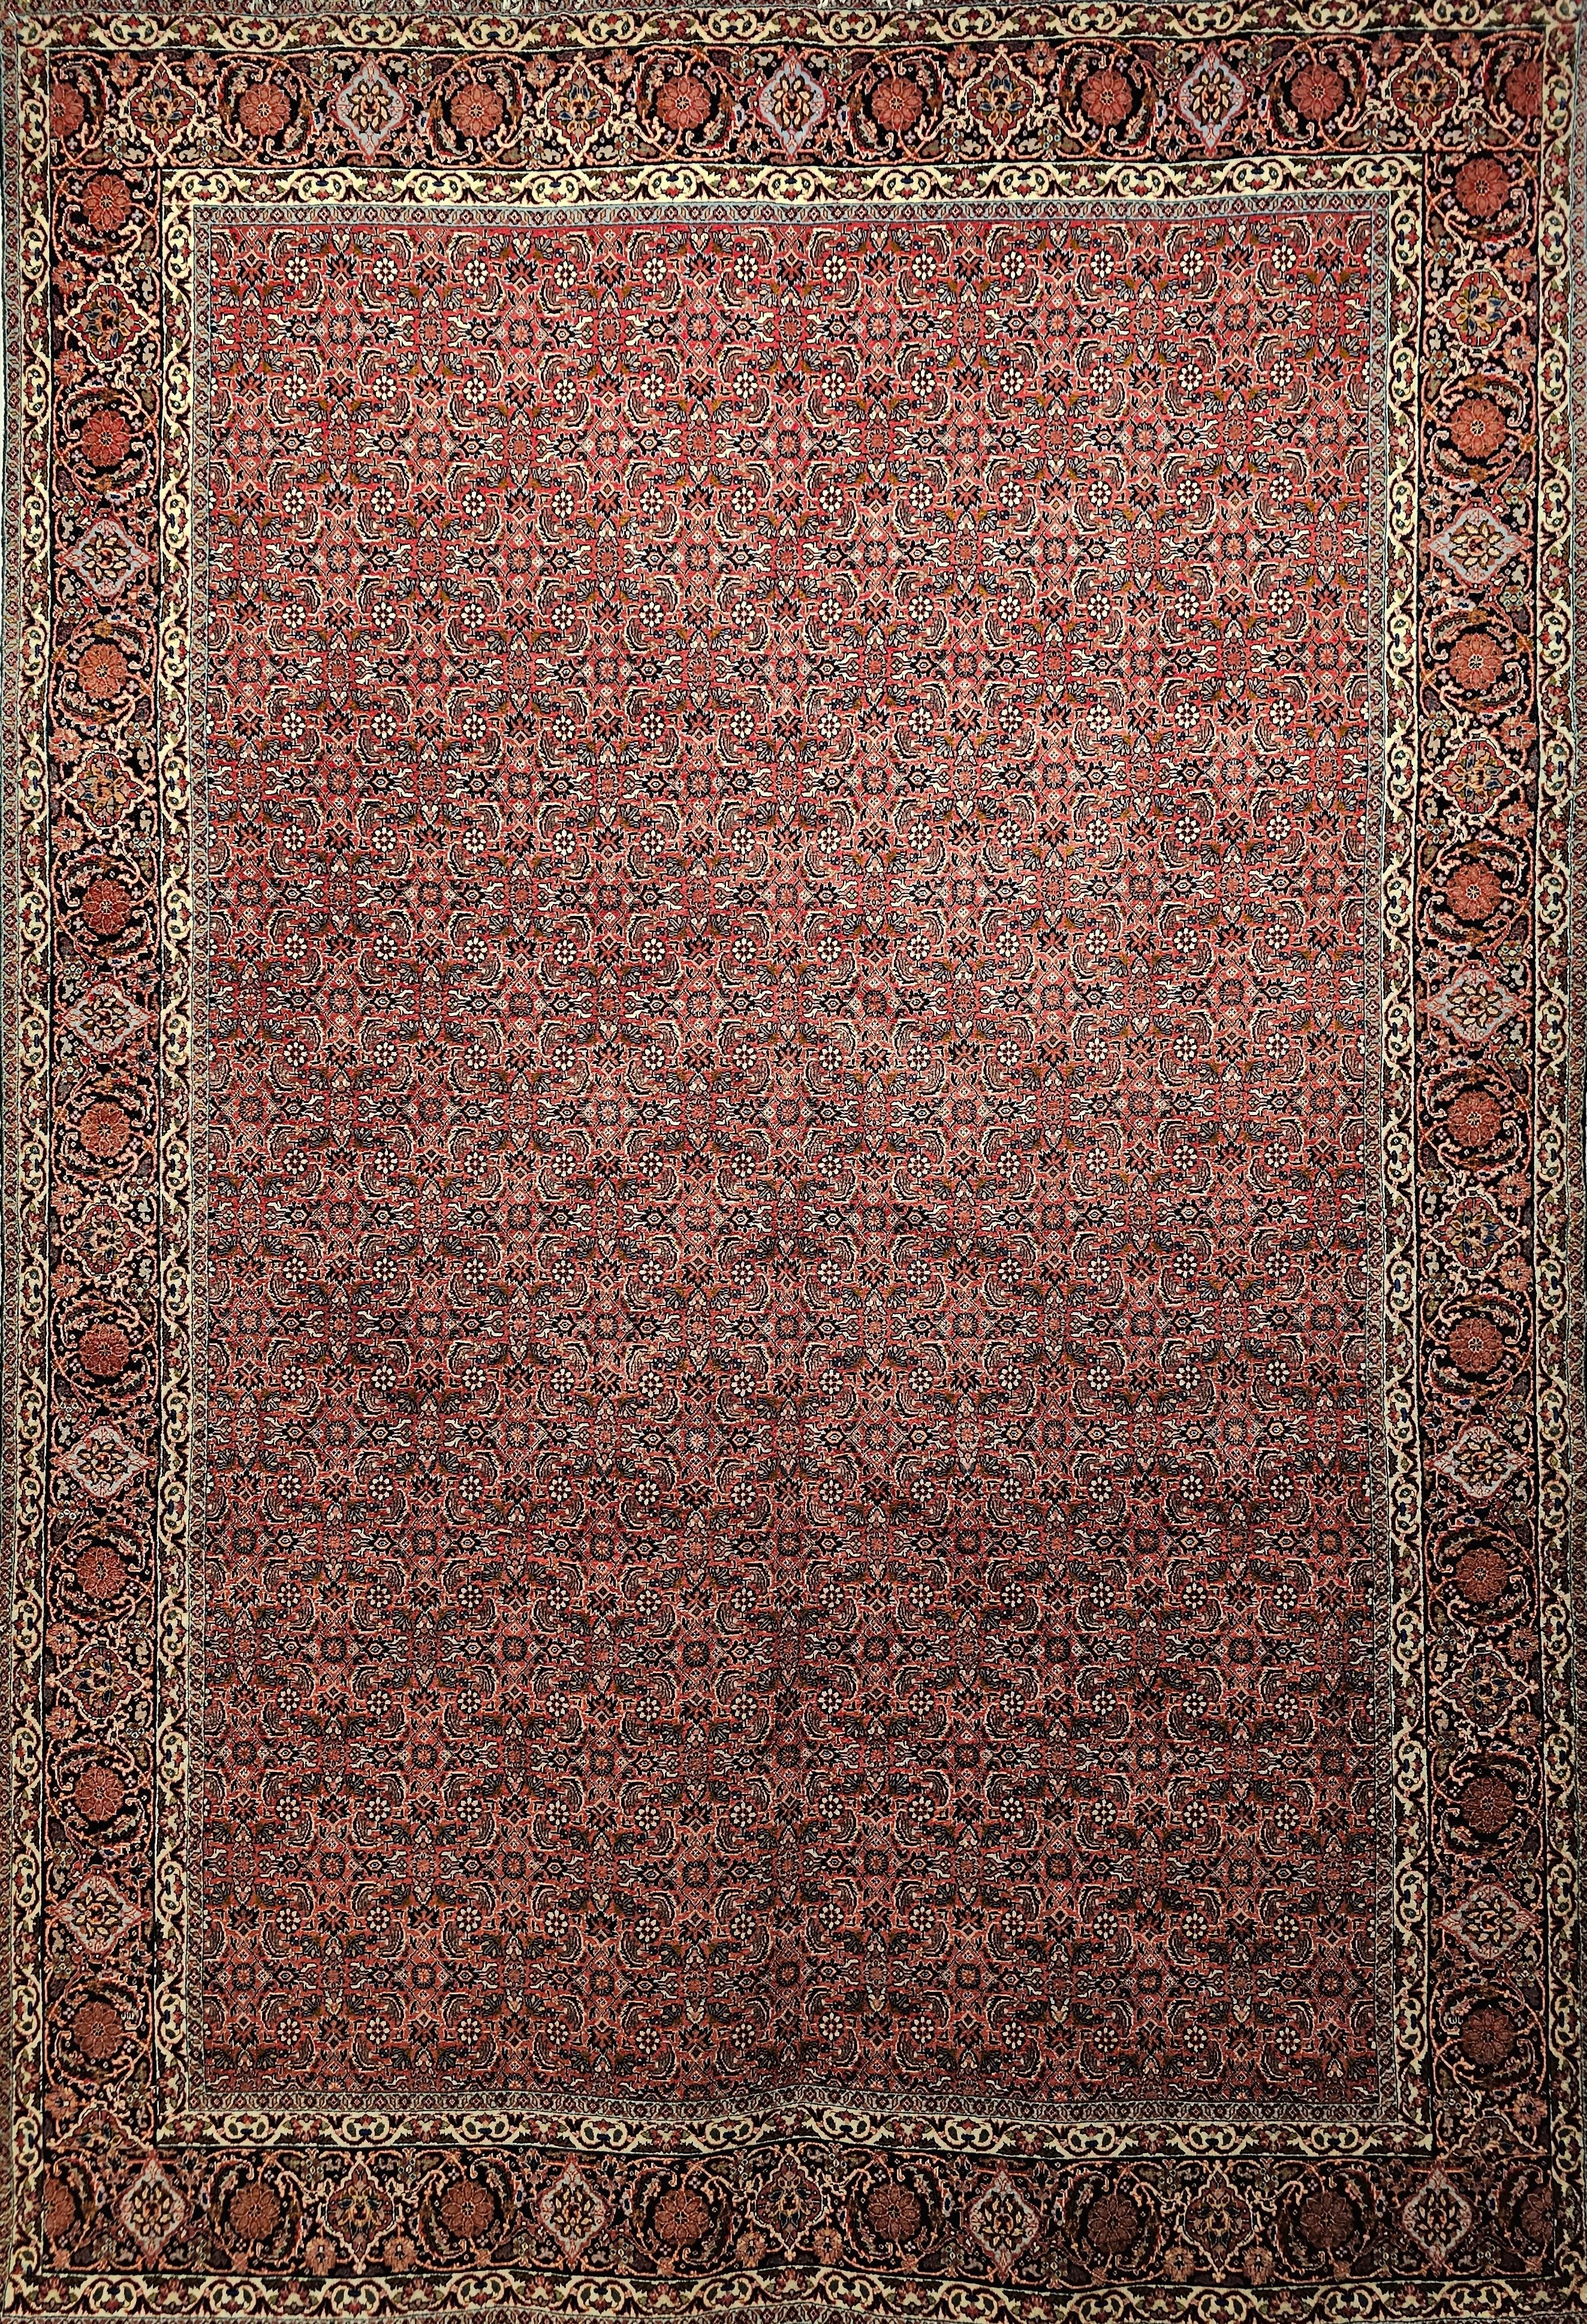  A Hand-Knotted Persian Bidjar in an all over Herati geometric pattern from the late 1900s.  The rug has a red background color with designs in navy blue, ivory, French blue, and yellow.  The border is midnight blue/black background with design